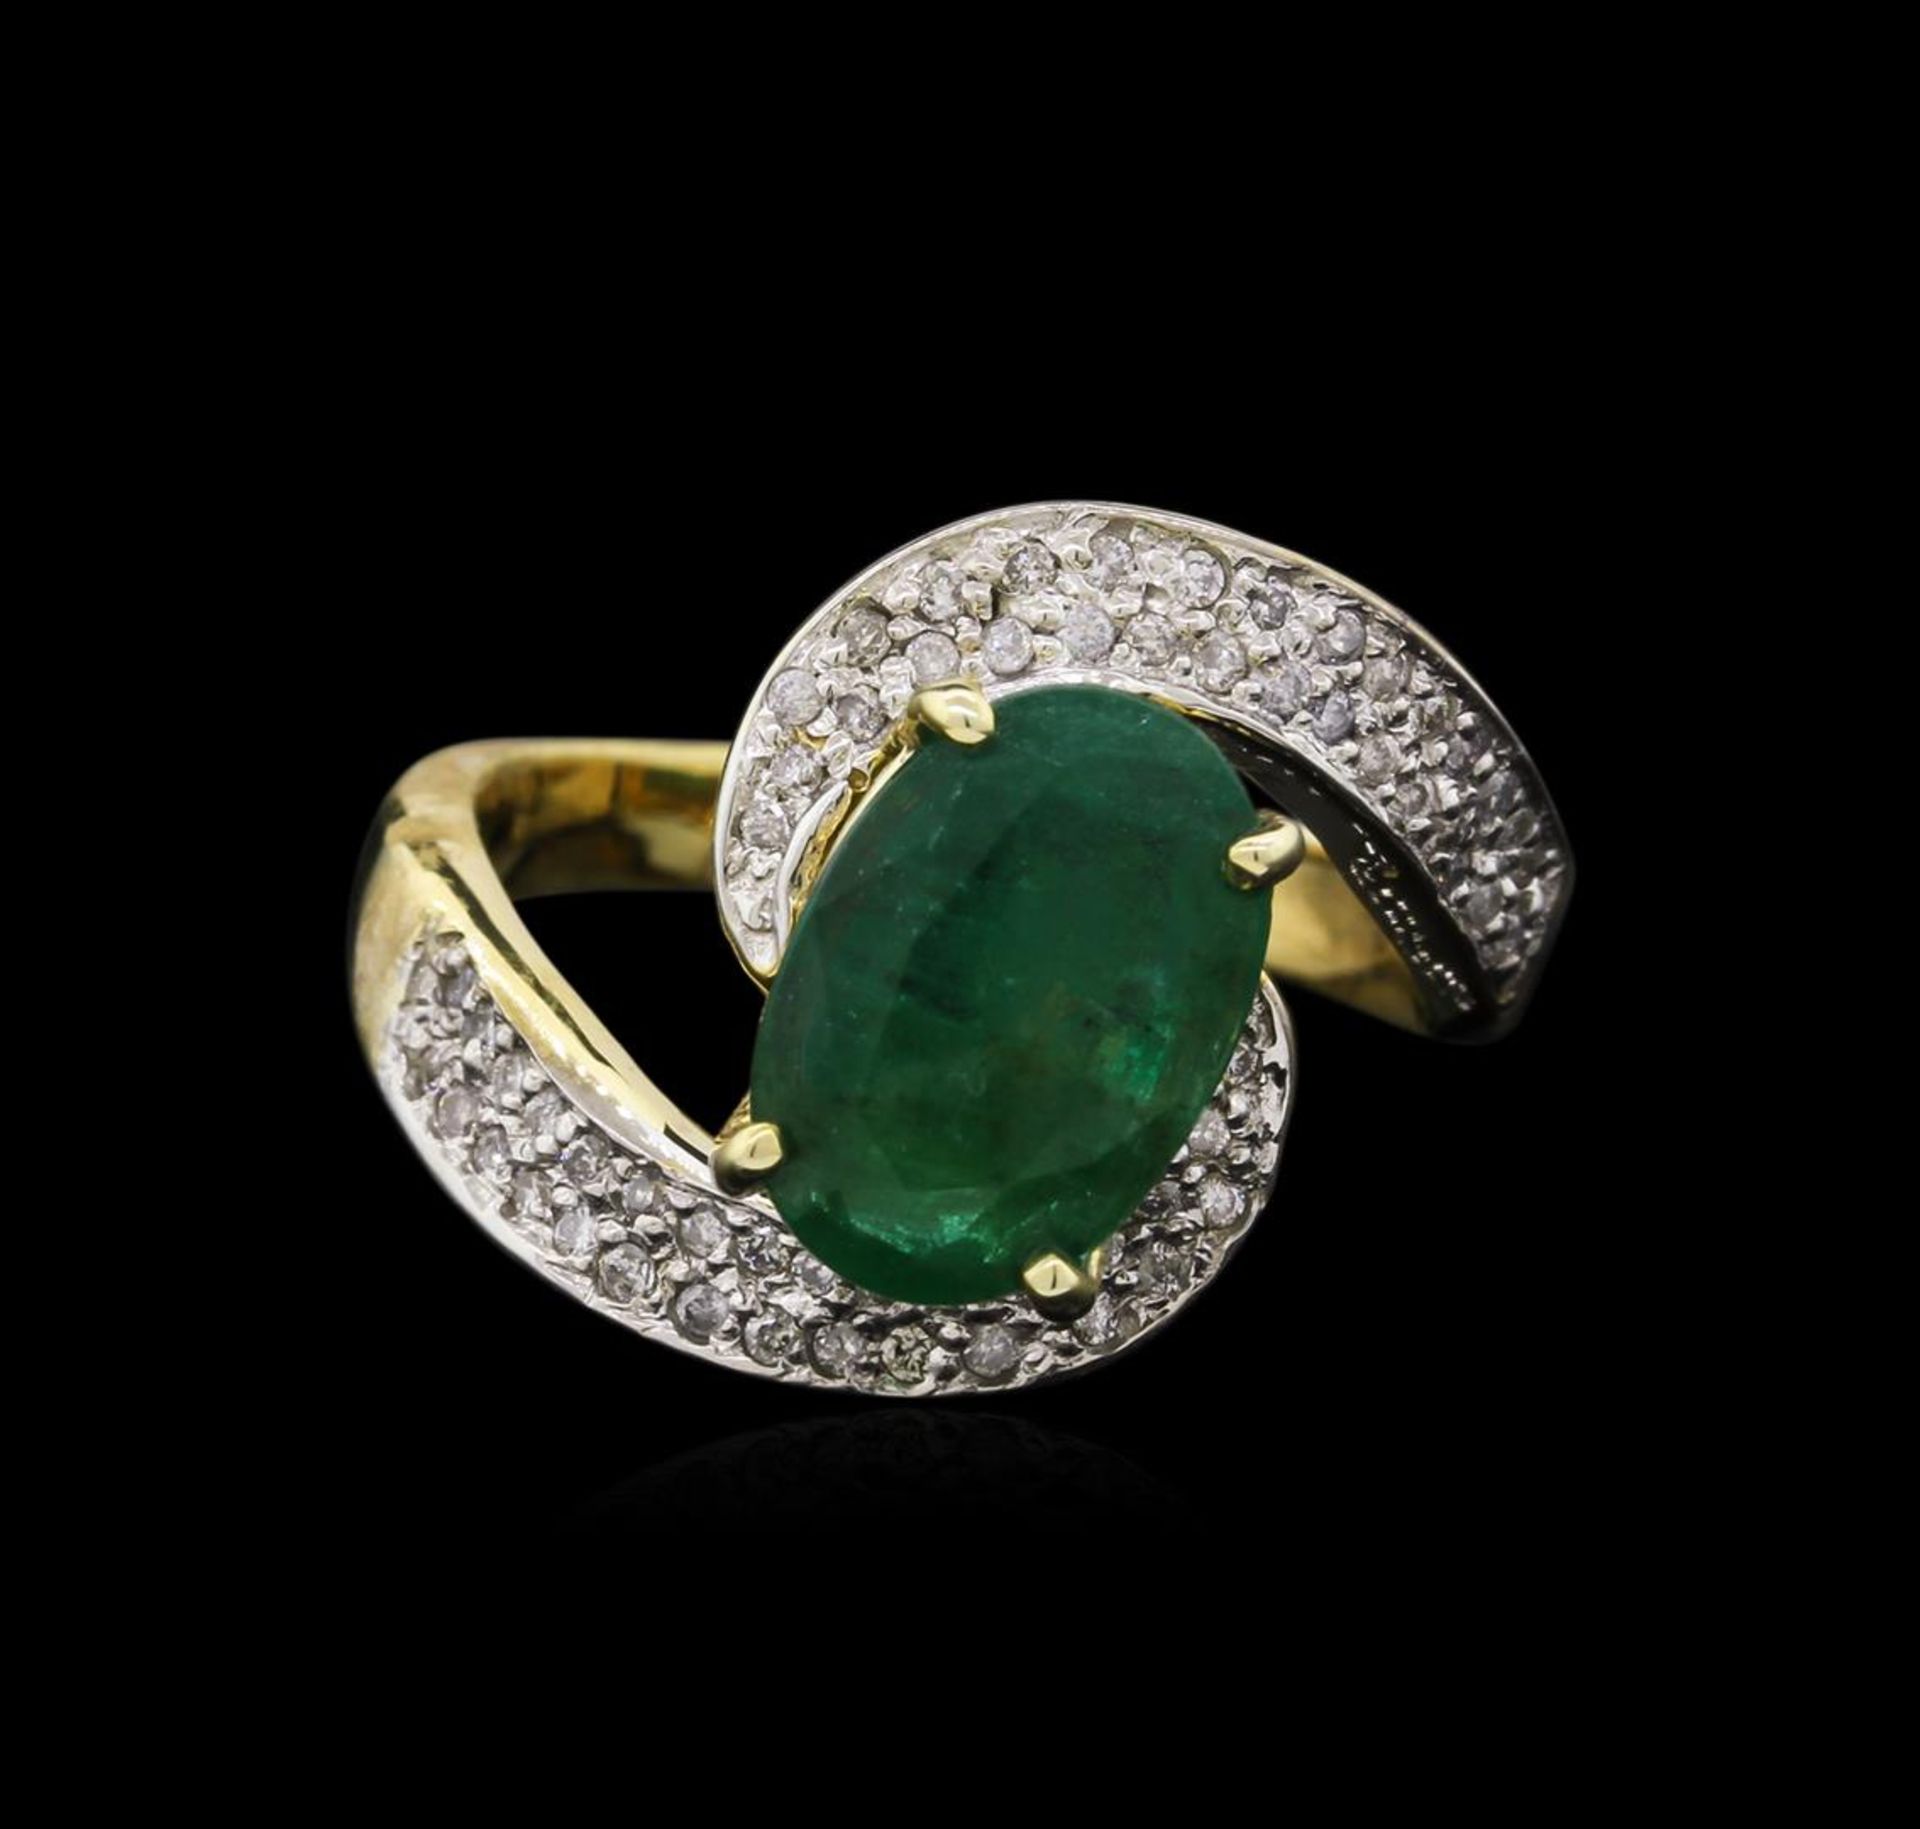 2.75 ctw Emerald and Diamond Ring - 14KT Yellow Gold - Image 2 of 2